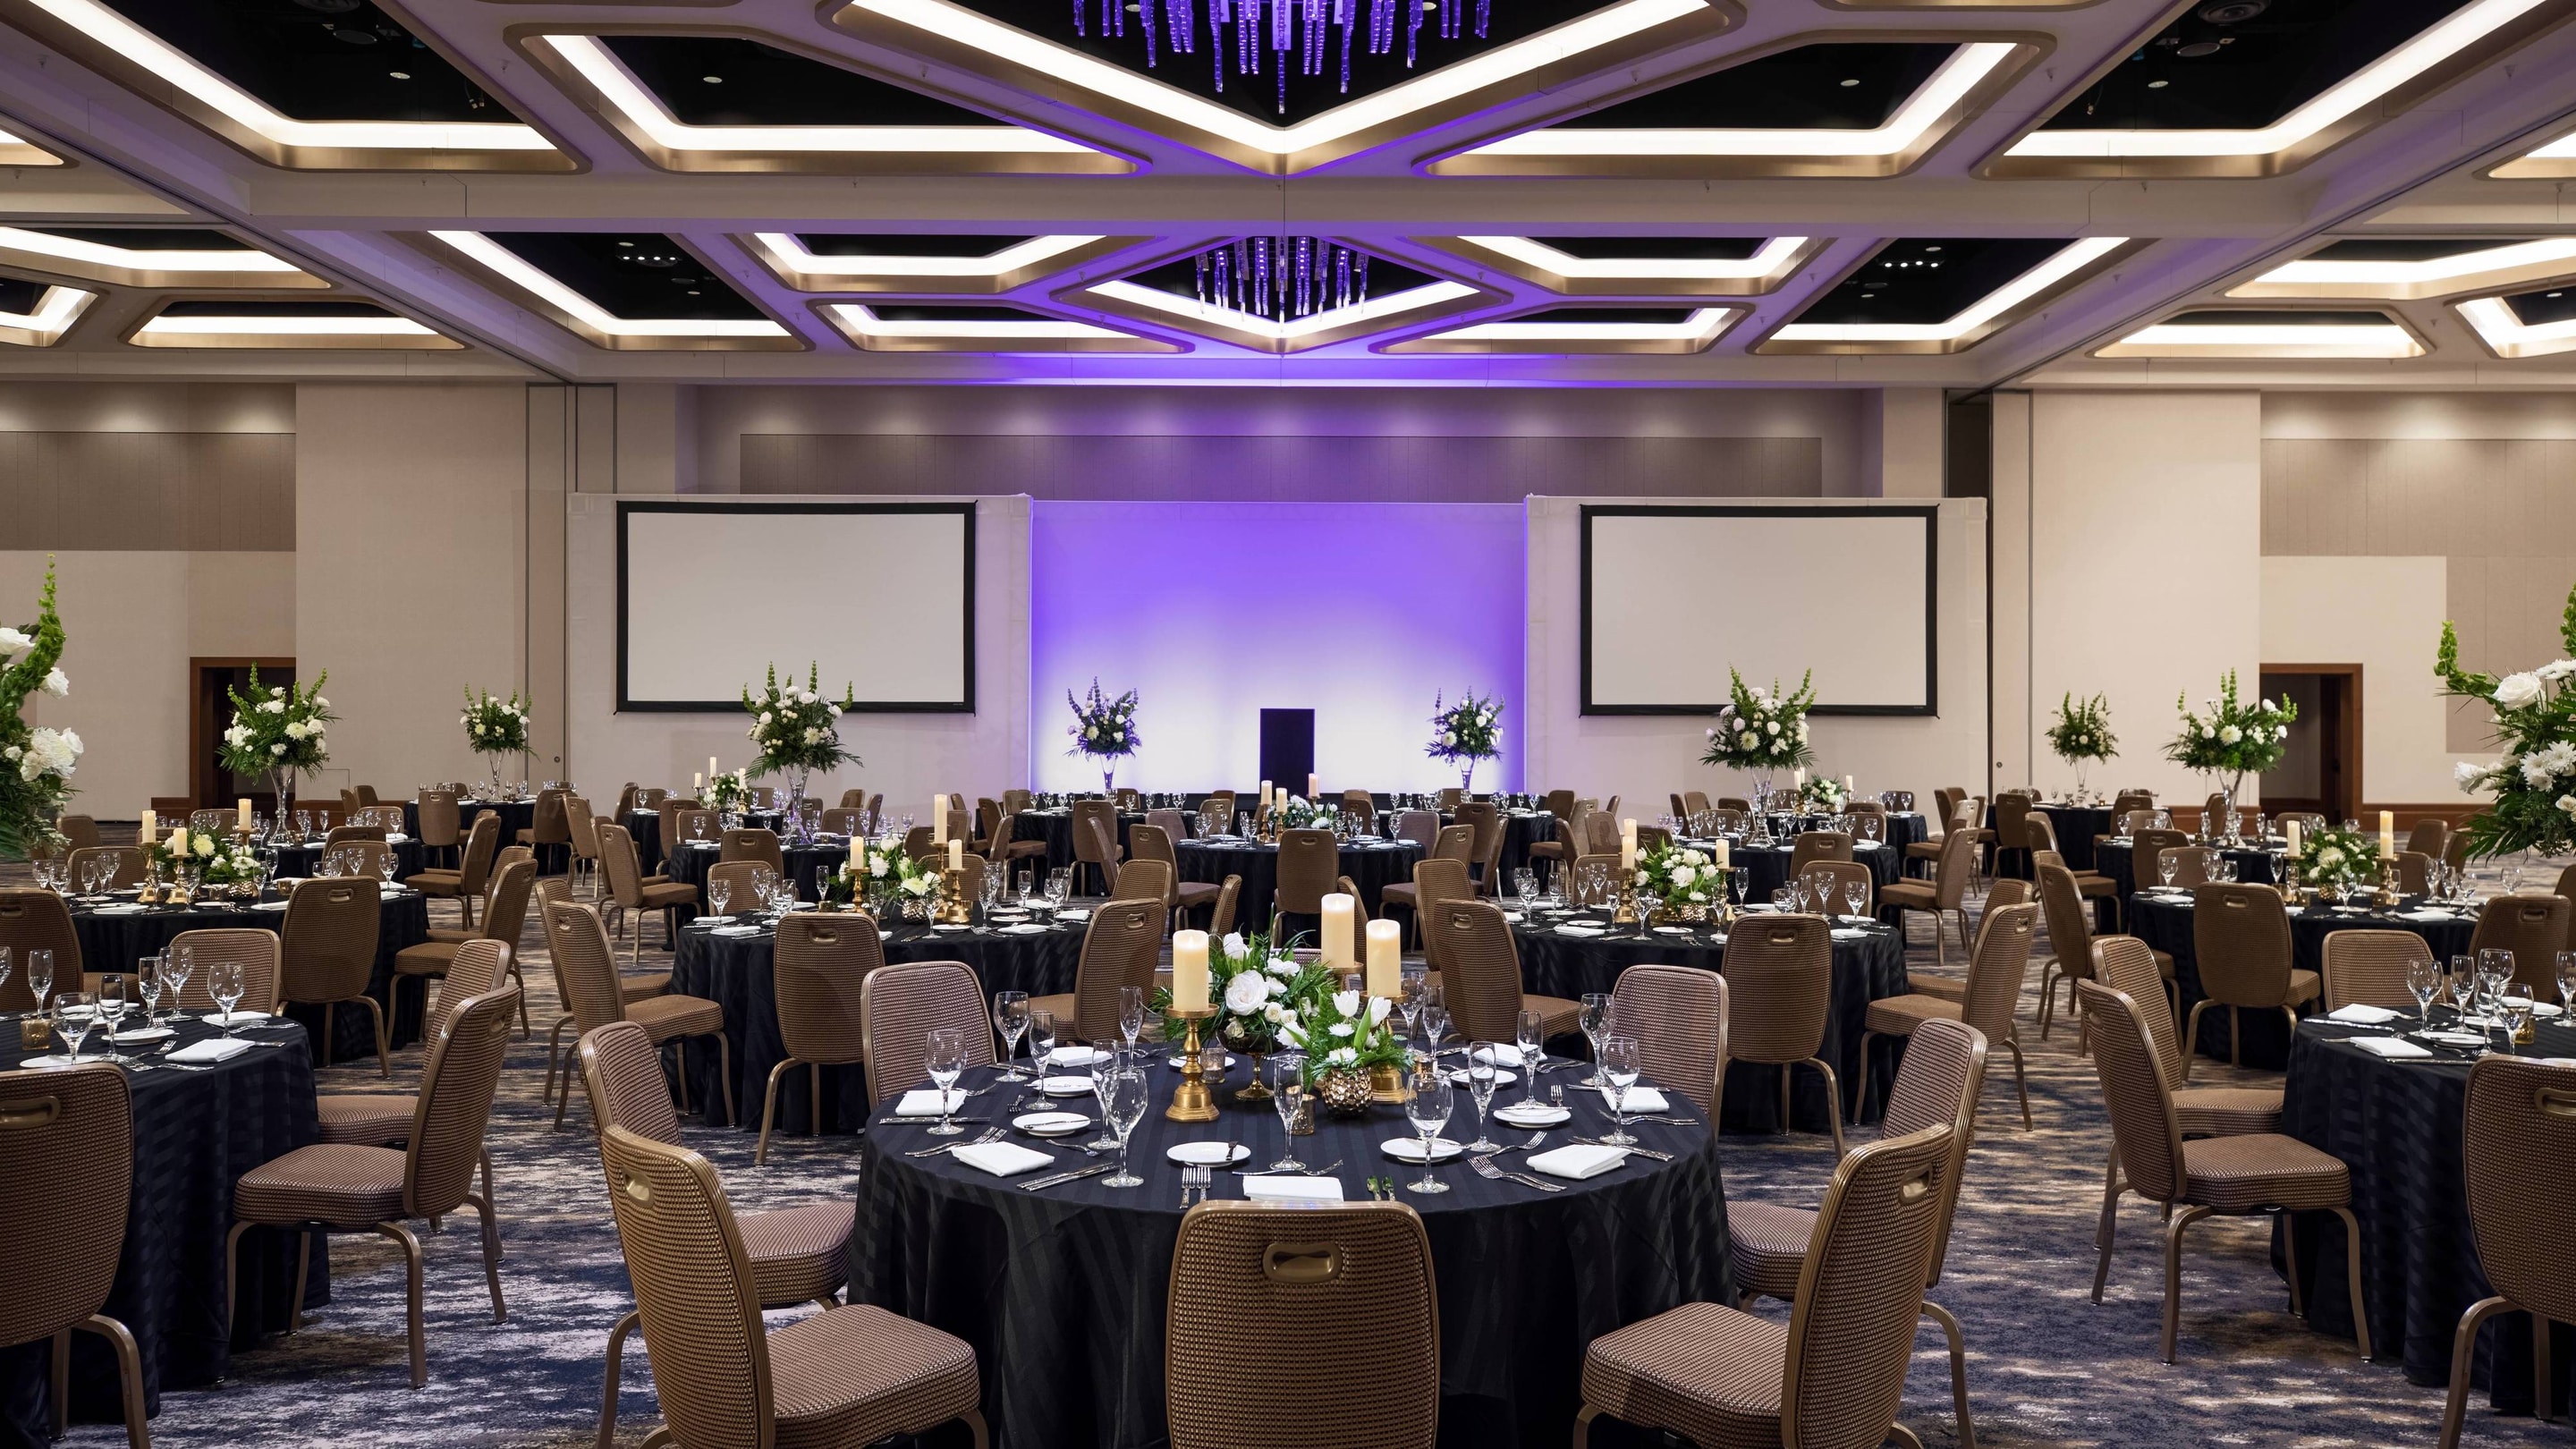 Peninsula ballroom in social setup, with dining tables and chairs.